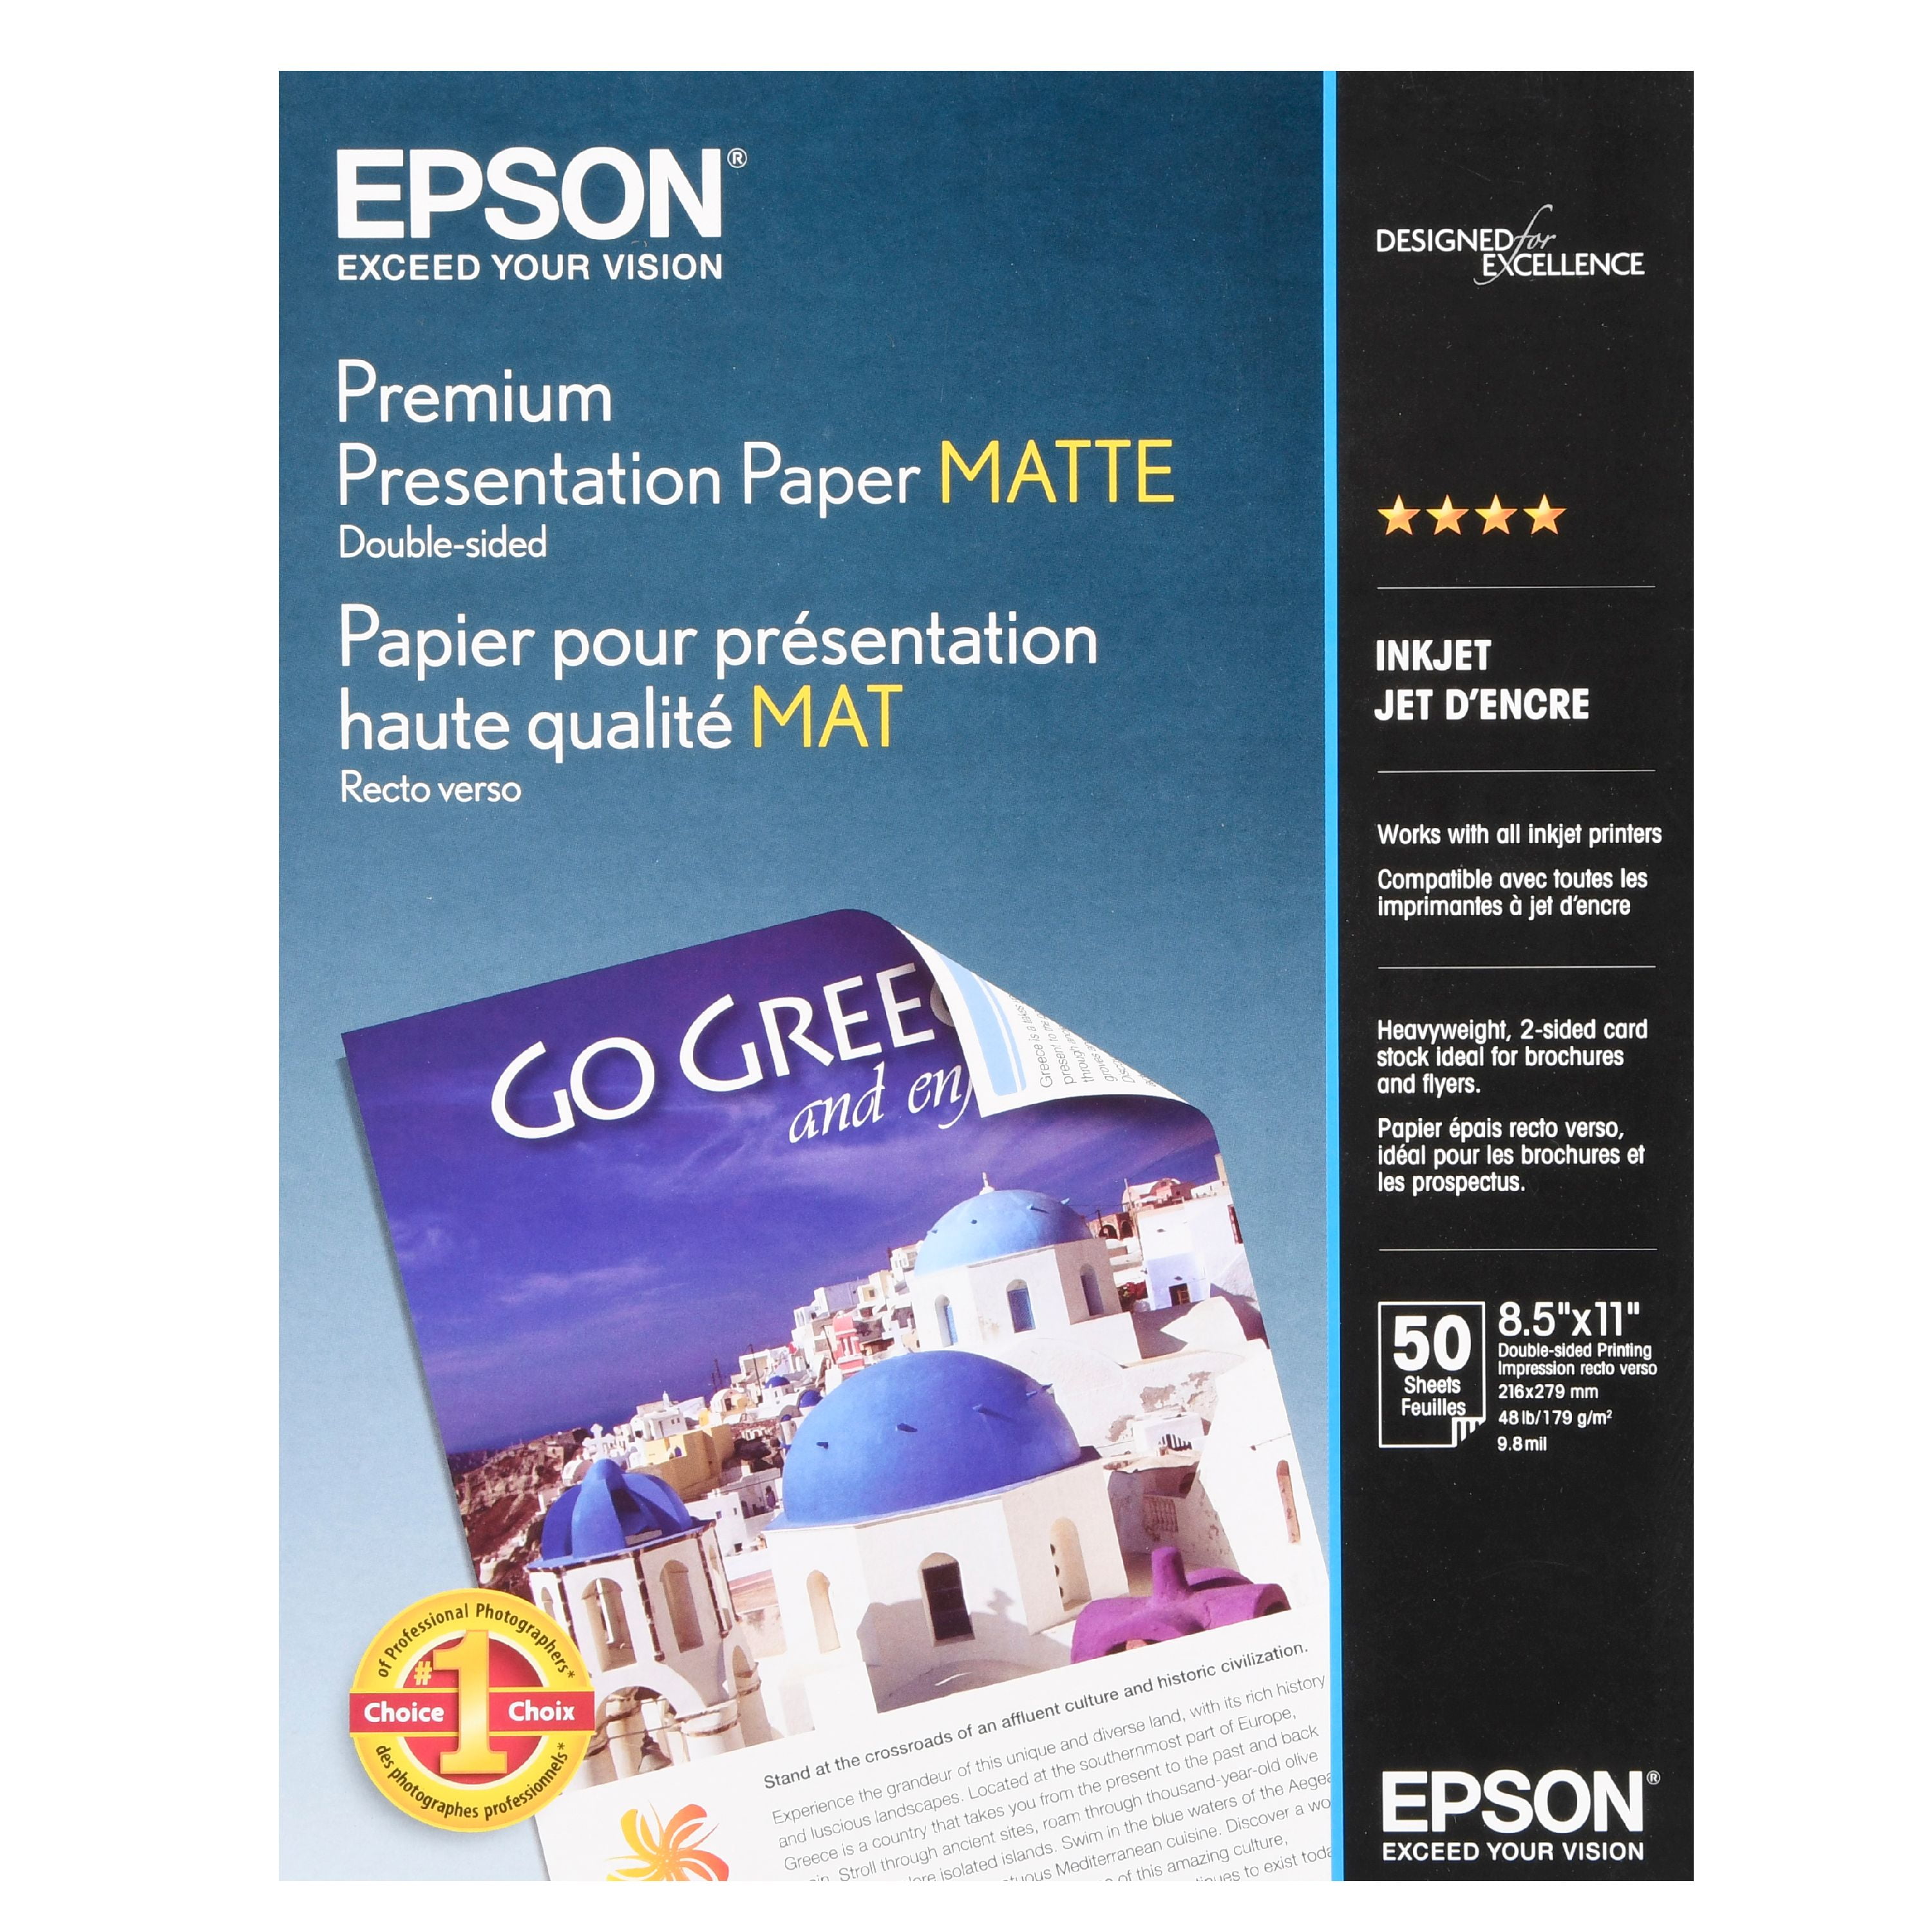 Epson Premium Presentation Paper MATTE 8.5x11 Inches Double sided 50 Sheets NEW